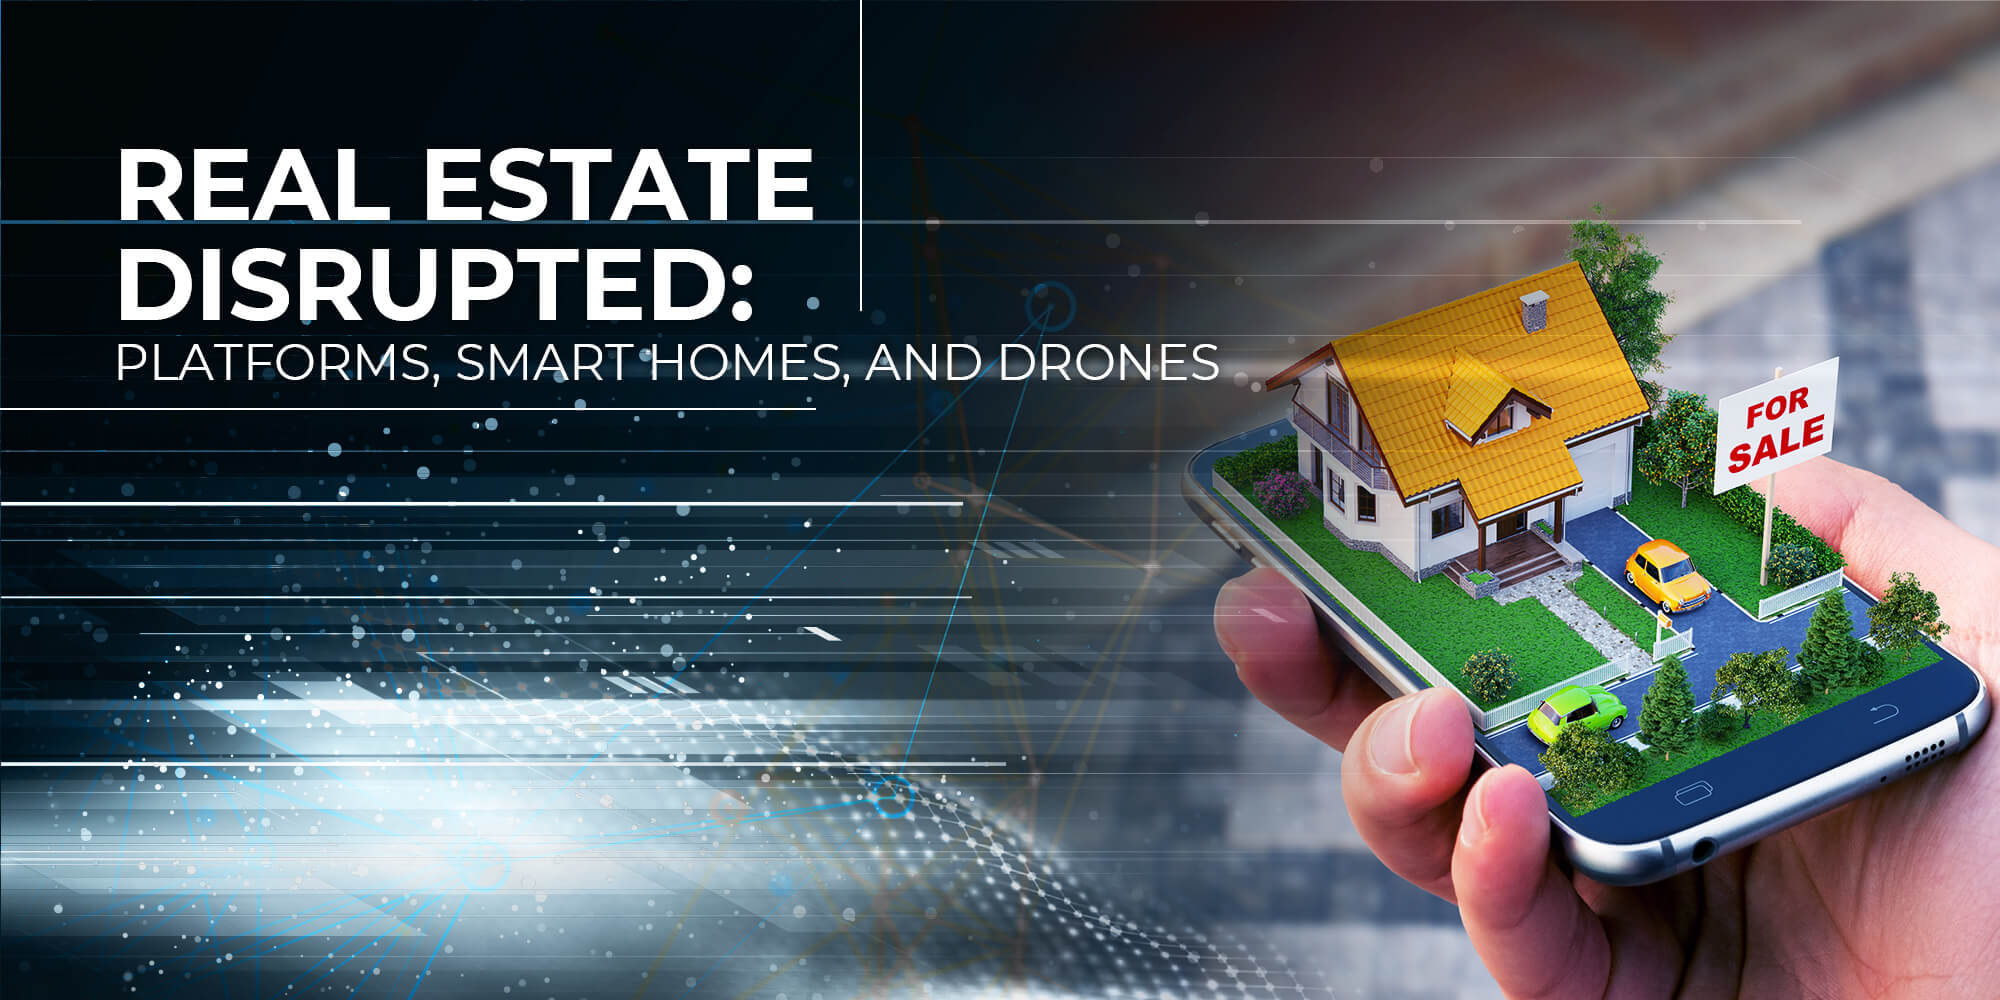 Real Estate Disrupted: Platforms, Smart Homes, and Drones